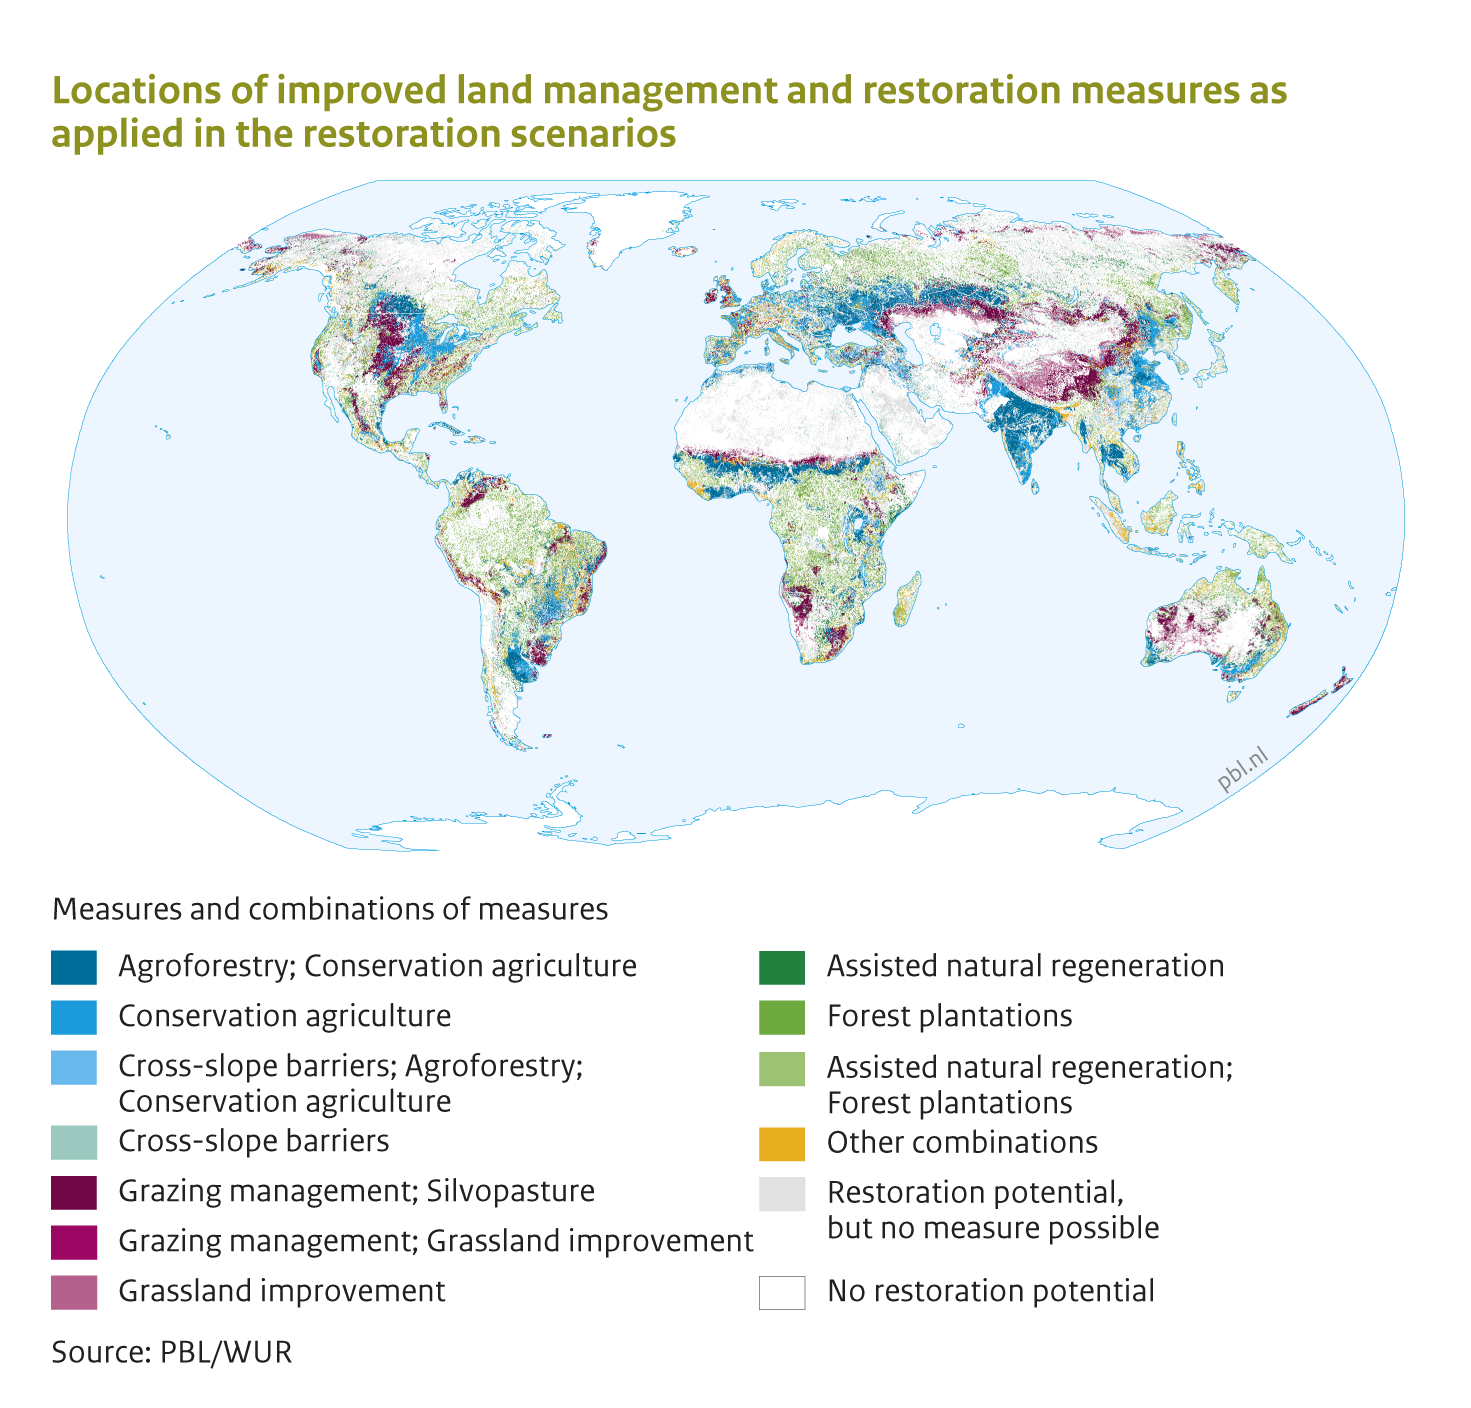 Locations of improved land management and restoration measures as applied in the restoration scenarios. World map that shows different combinations of restoration measures can be applied globally.